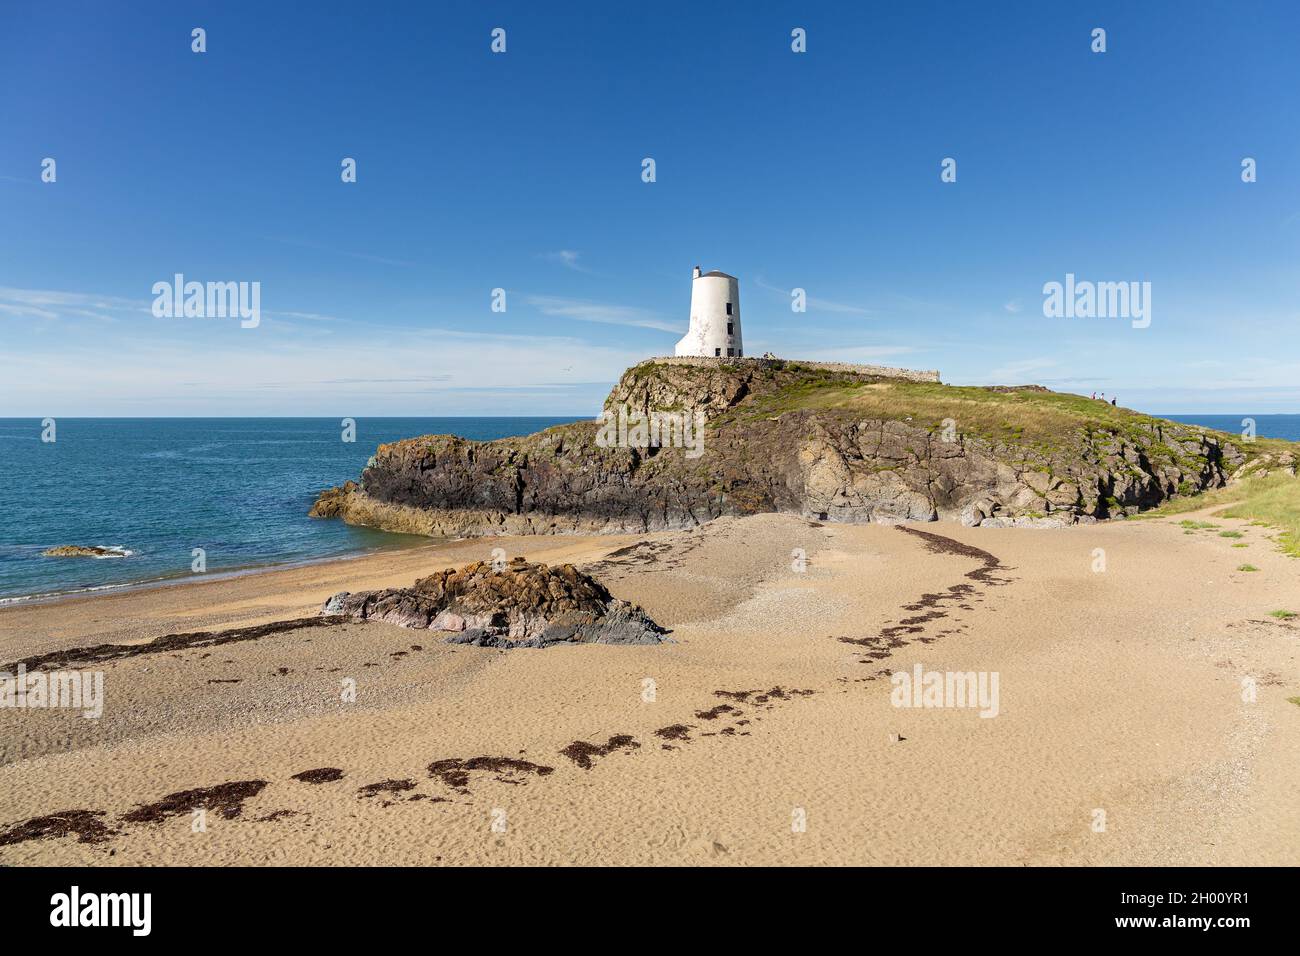 Llanddwyn, Wales: Twr Mawr lighthouse, on the coast of Anglesey, overlooking the Irish sea, used to guide ships in to the Menai st Stock Photo